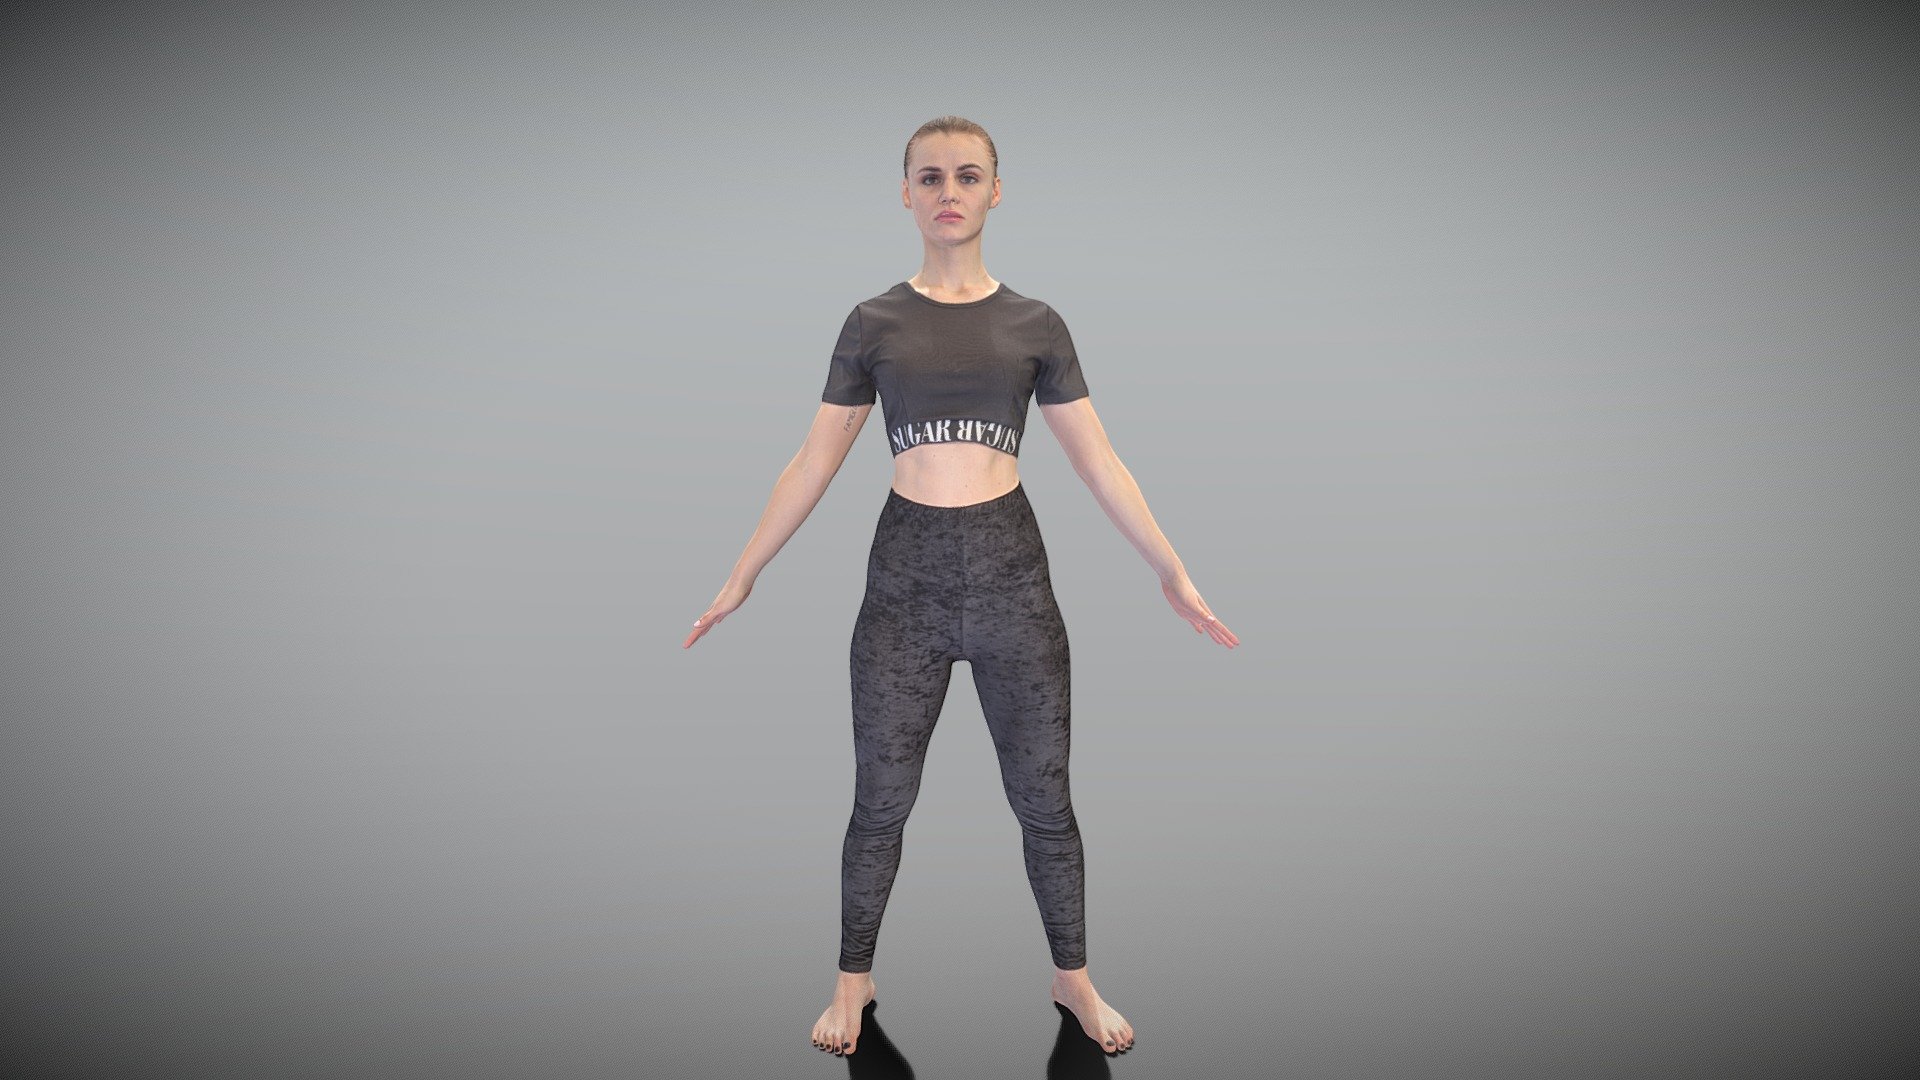 This is a true human size detailed model of a beautiful young woman of Caucasian appearance dressed in sportswear. The model is captured in the A-pose with mesh ready for rigging and animation in all most usable 3d software.

Technical specifications:




digital double scan model

low-poly model

high-poly model (.ztl tool with 5-6 subdivisions) clean and retopologized automatically via ZRemesher

fully quad topology

sufficiently clean

edge Loops based

ready for subdivision

8K texture color map

non-overlapping UV map

ready for animation

PBR textures 8K resolution: Normal, Displacement, Albedo maps

Download package includes a Cinema 4D project file with Redshift shader, OBJ, FBX, STL files, which are applicable for 3ds Max, Maya, Unreal Engine, Unity, Blender, etc. All the textures you will find in the “Tex” folder, included into the main archive.

3D EVERYTHING

Stand with Ukraine! - Beautiful woman in sportswear in A-pose 435 - Buy Royalty Free 3D model by deep3dstudio 3d model